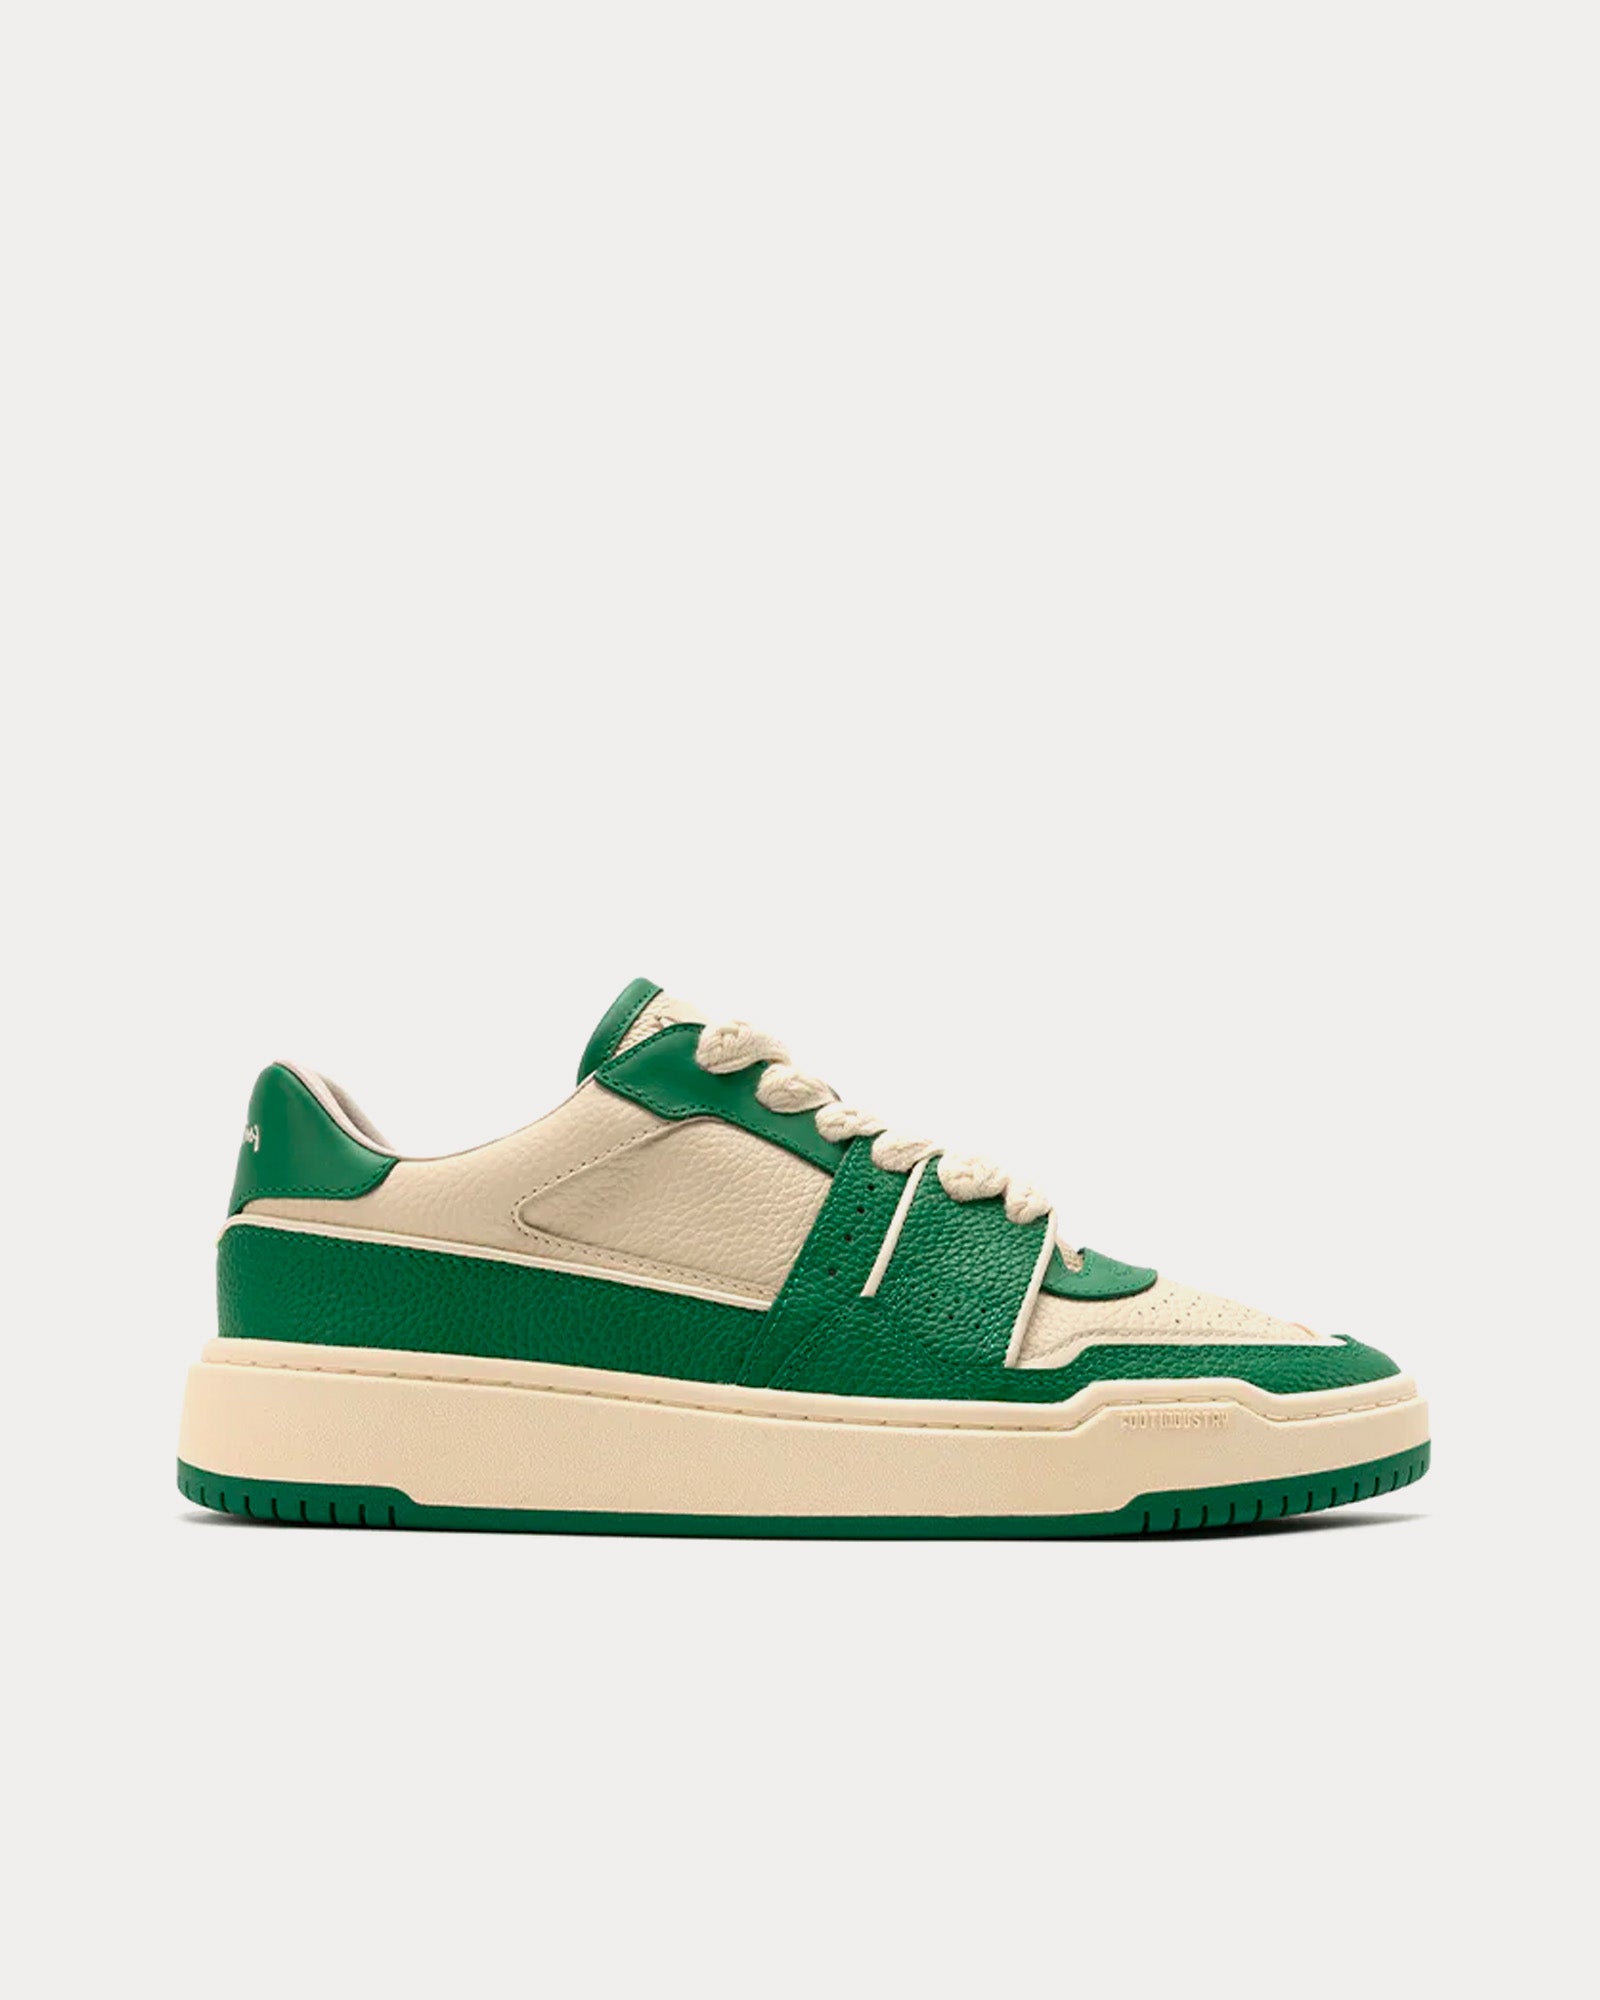 Foot Industry - 90's Skate Off-White / Green Low Top Sneakers